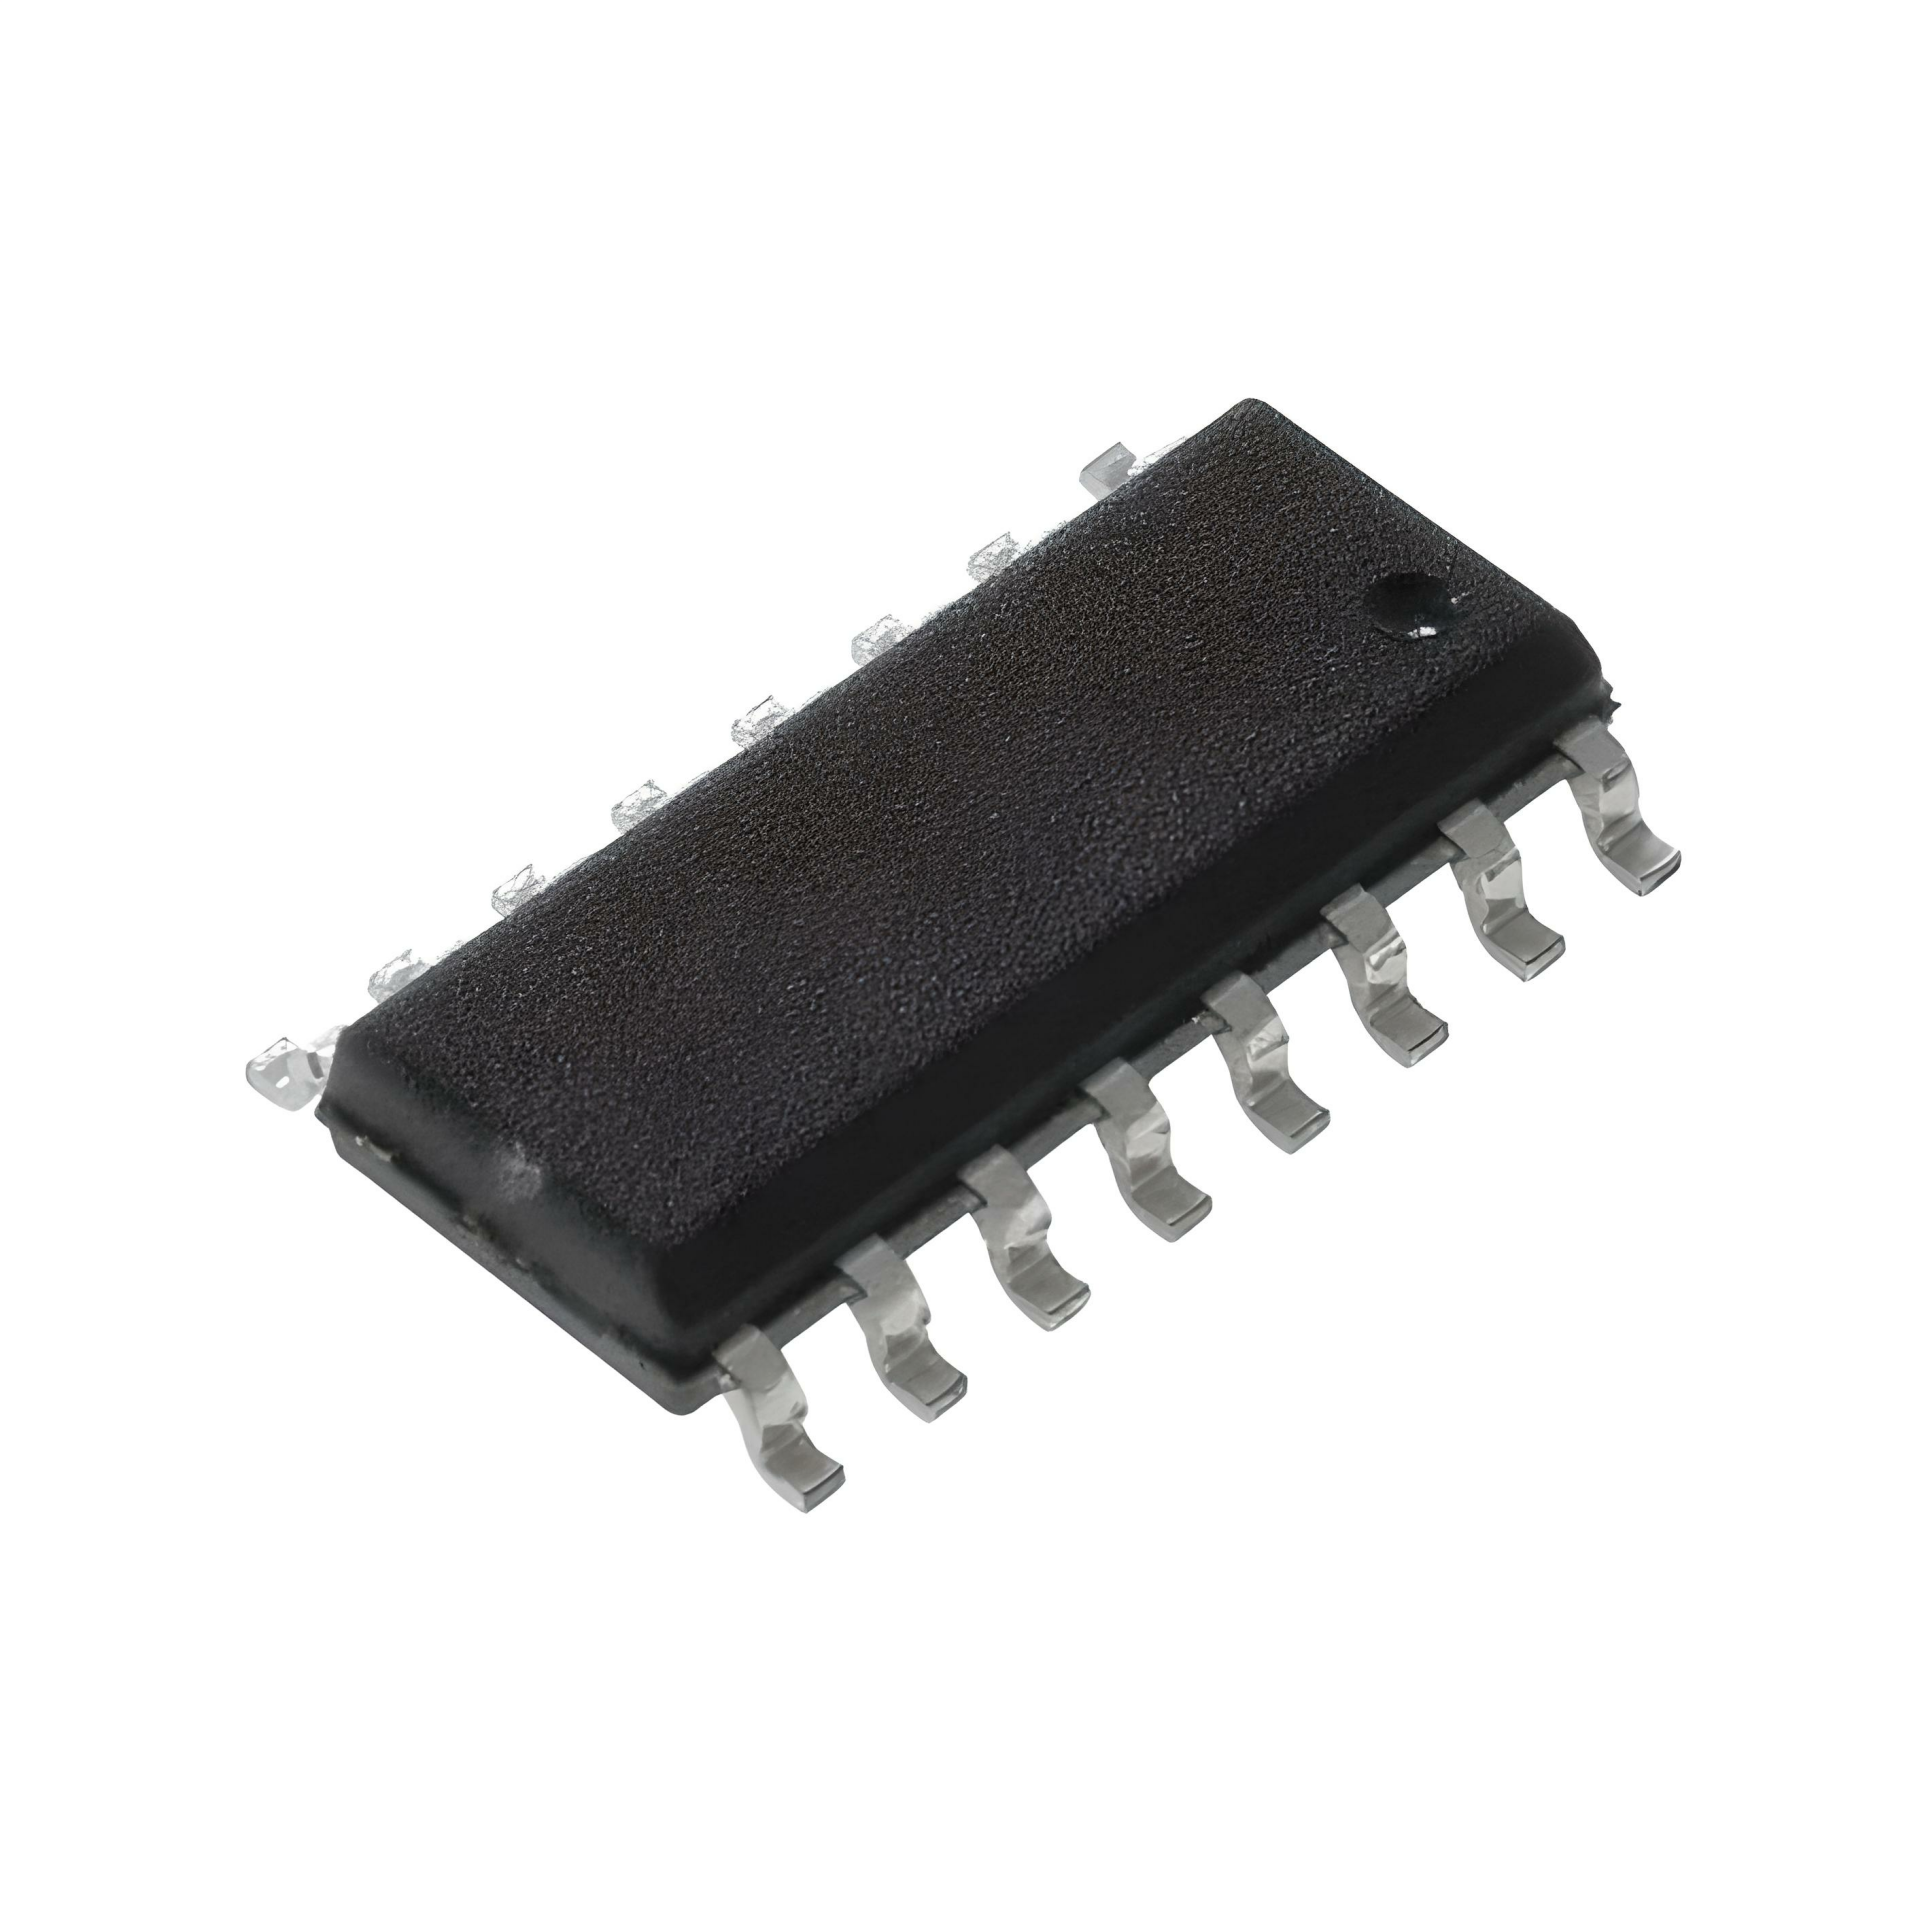 TLP281-4GB -(THP4, IS281-4GB)   SO-16   TRANSISTOR OUTPUT OPTOCOUPLER